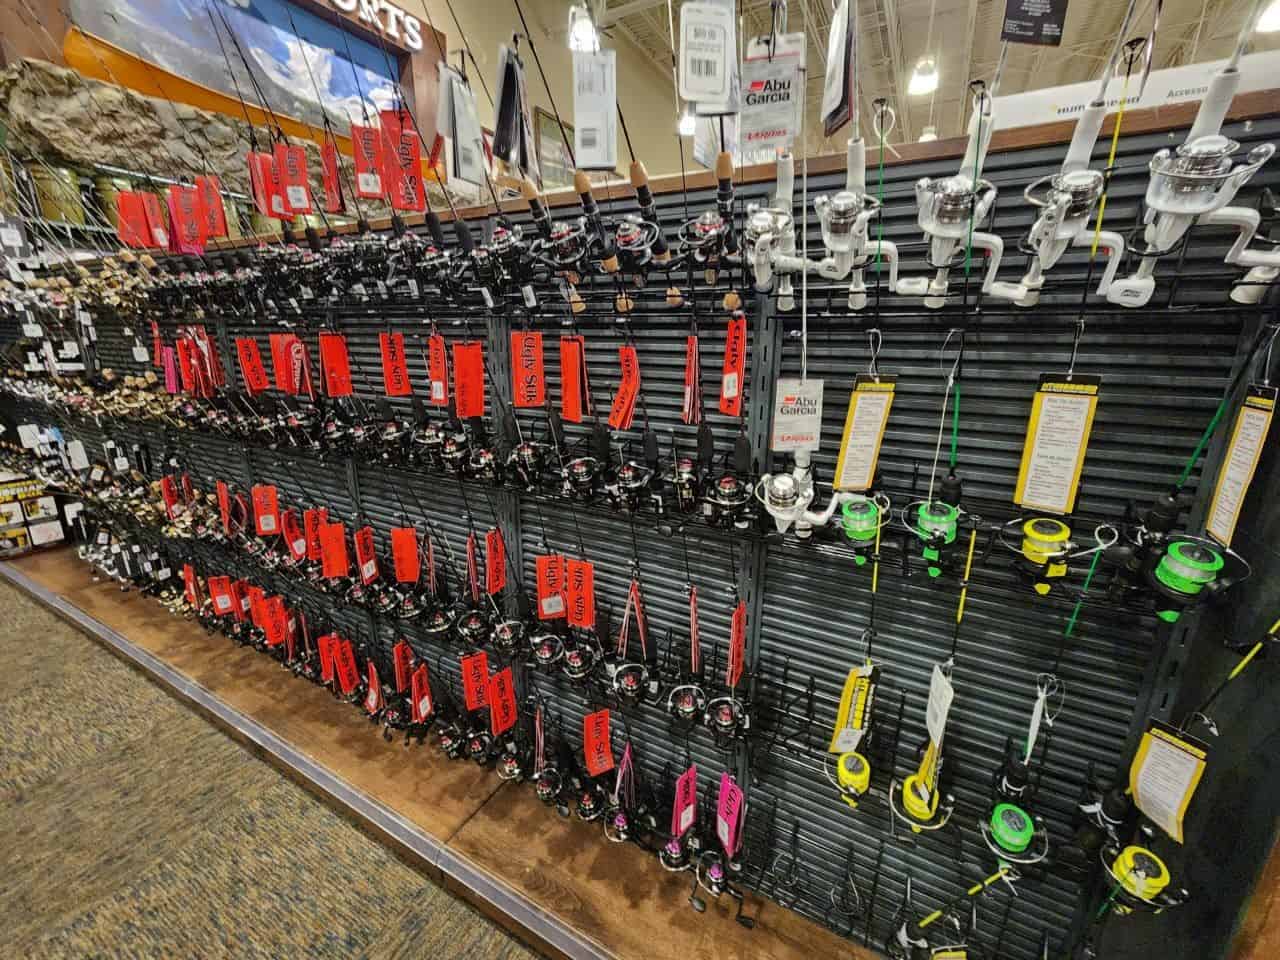 Cabelas is a fantastic place to pick out an ice rod. With friendly helpful staff, they'll get you set up and on your way ice fishing with all the gear you need.